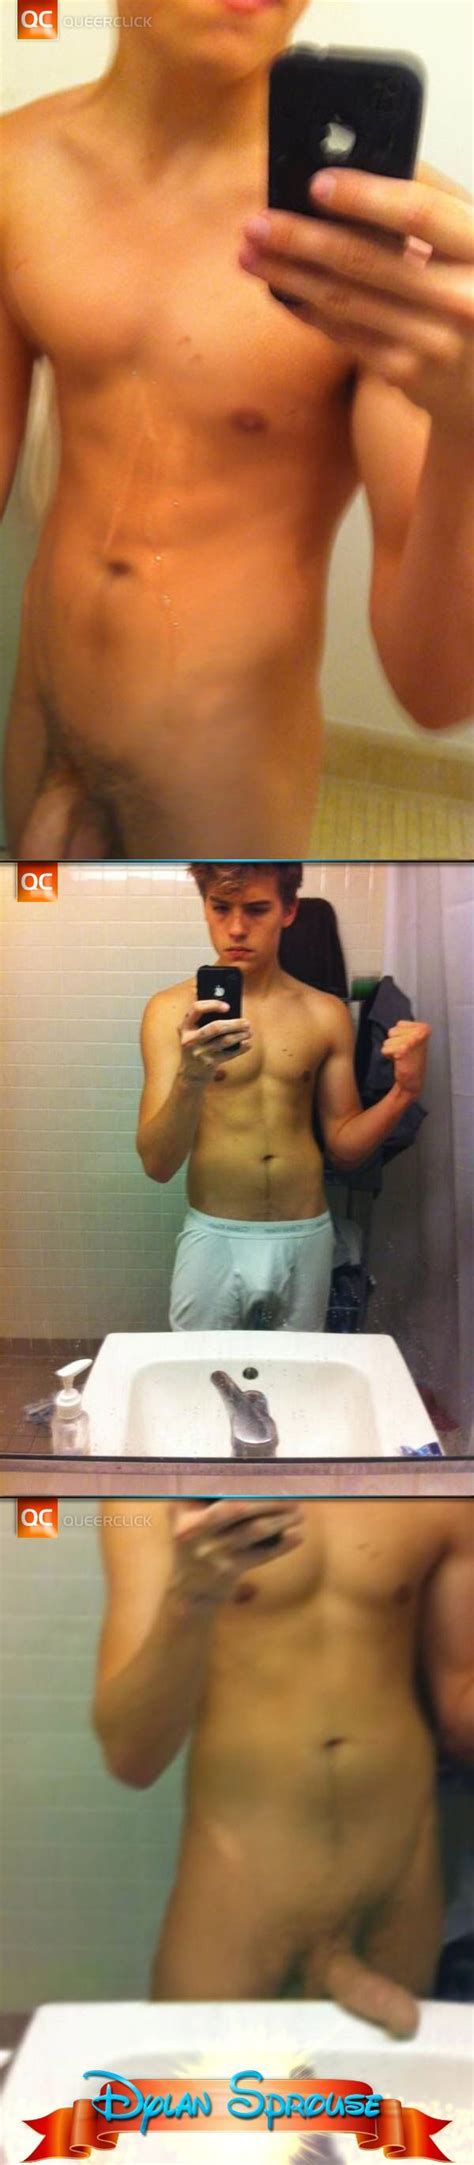 Dylan Sprouse Small Penis Telegraph